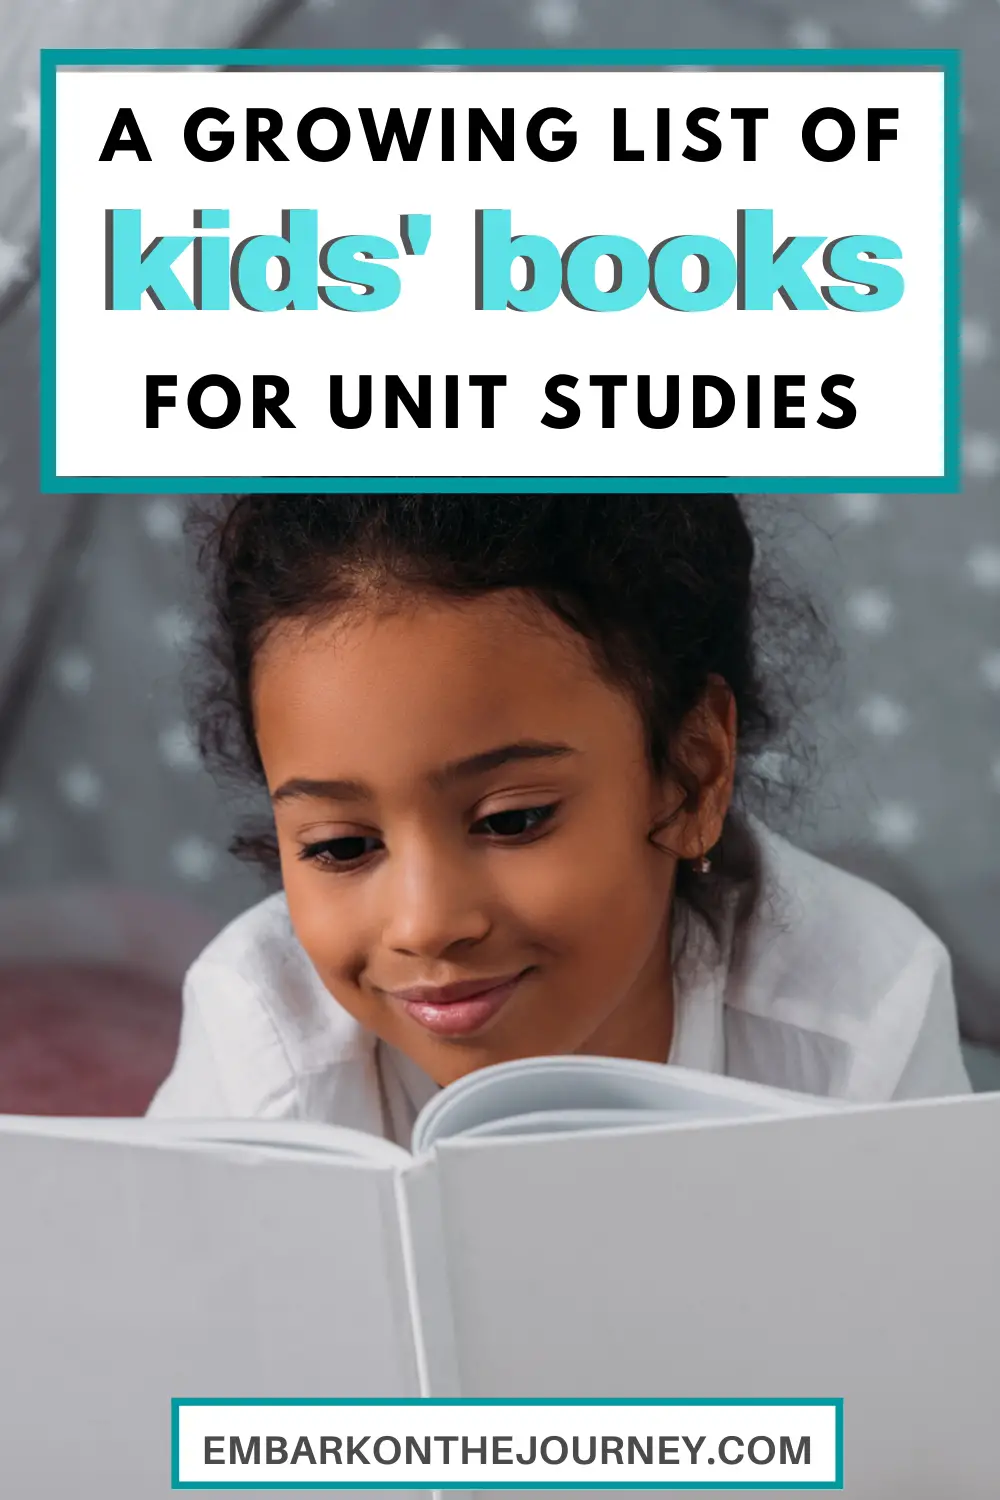 As you plan your unit studies throughout the year, these lists will help you discover both new and classic kids favorite books on a variety of topics.